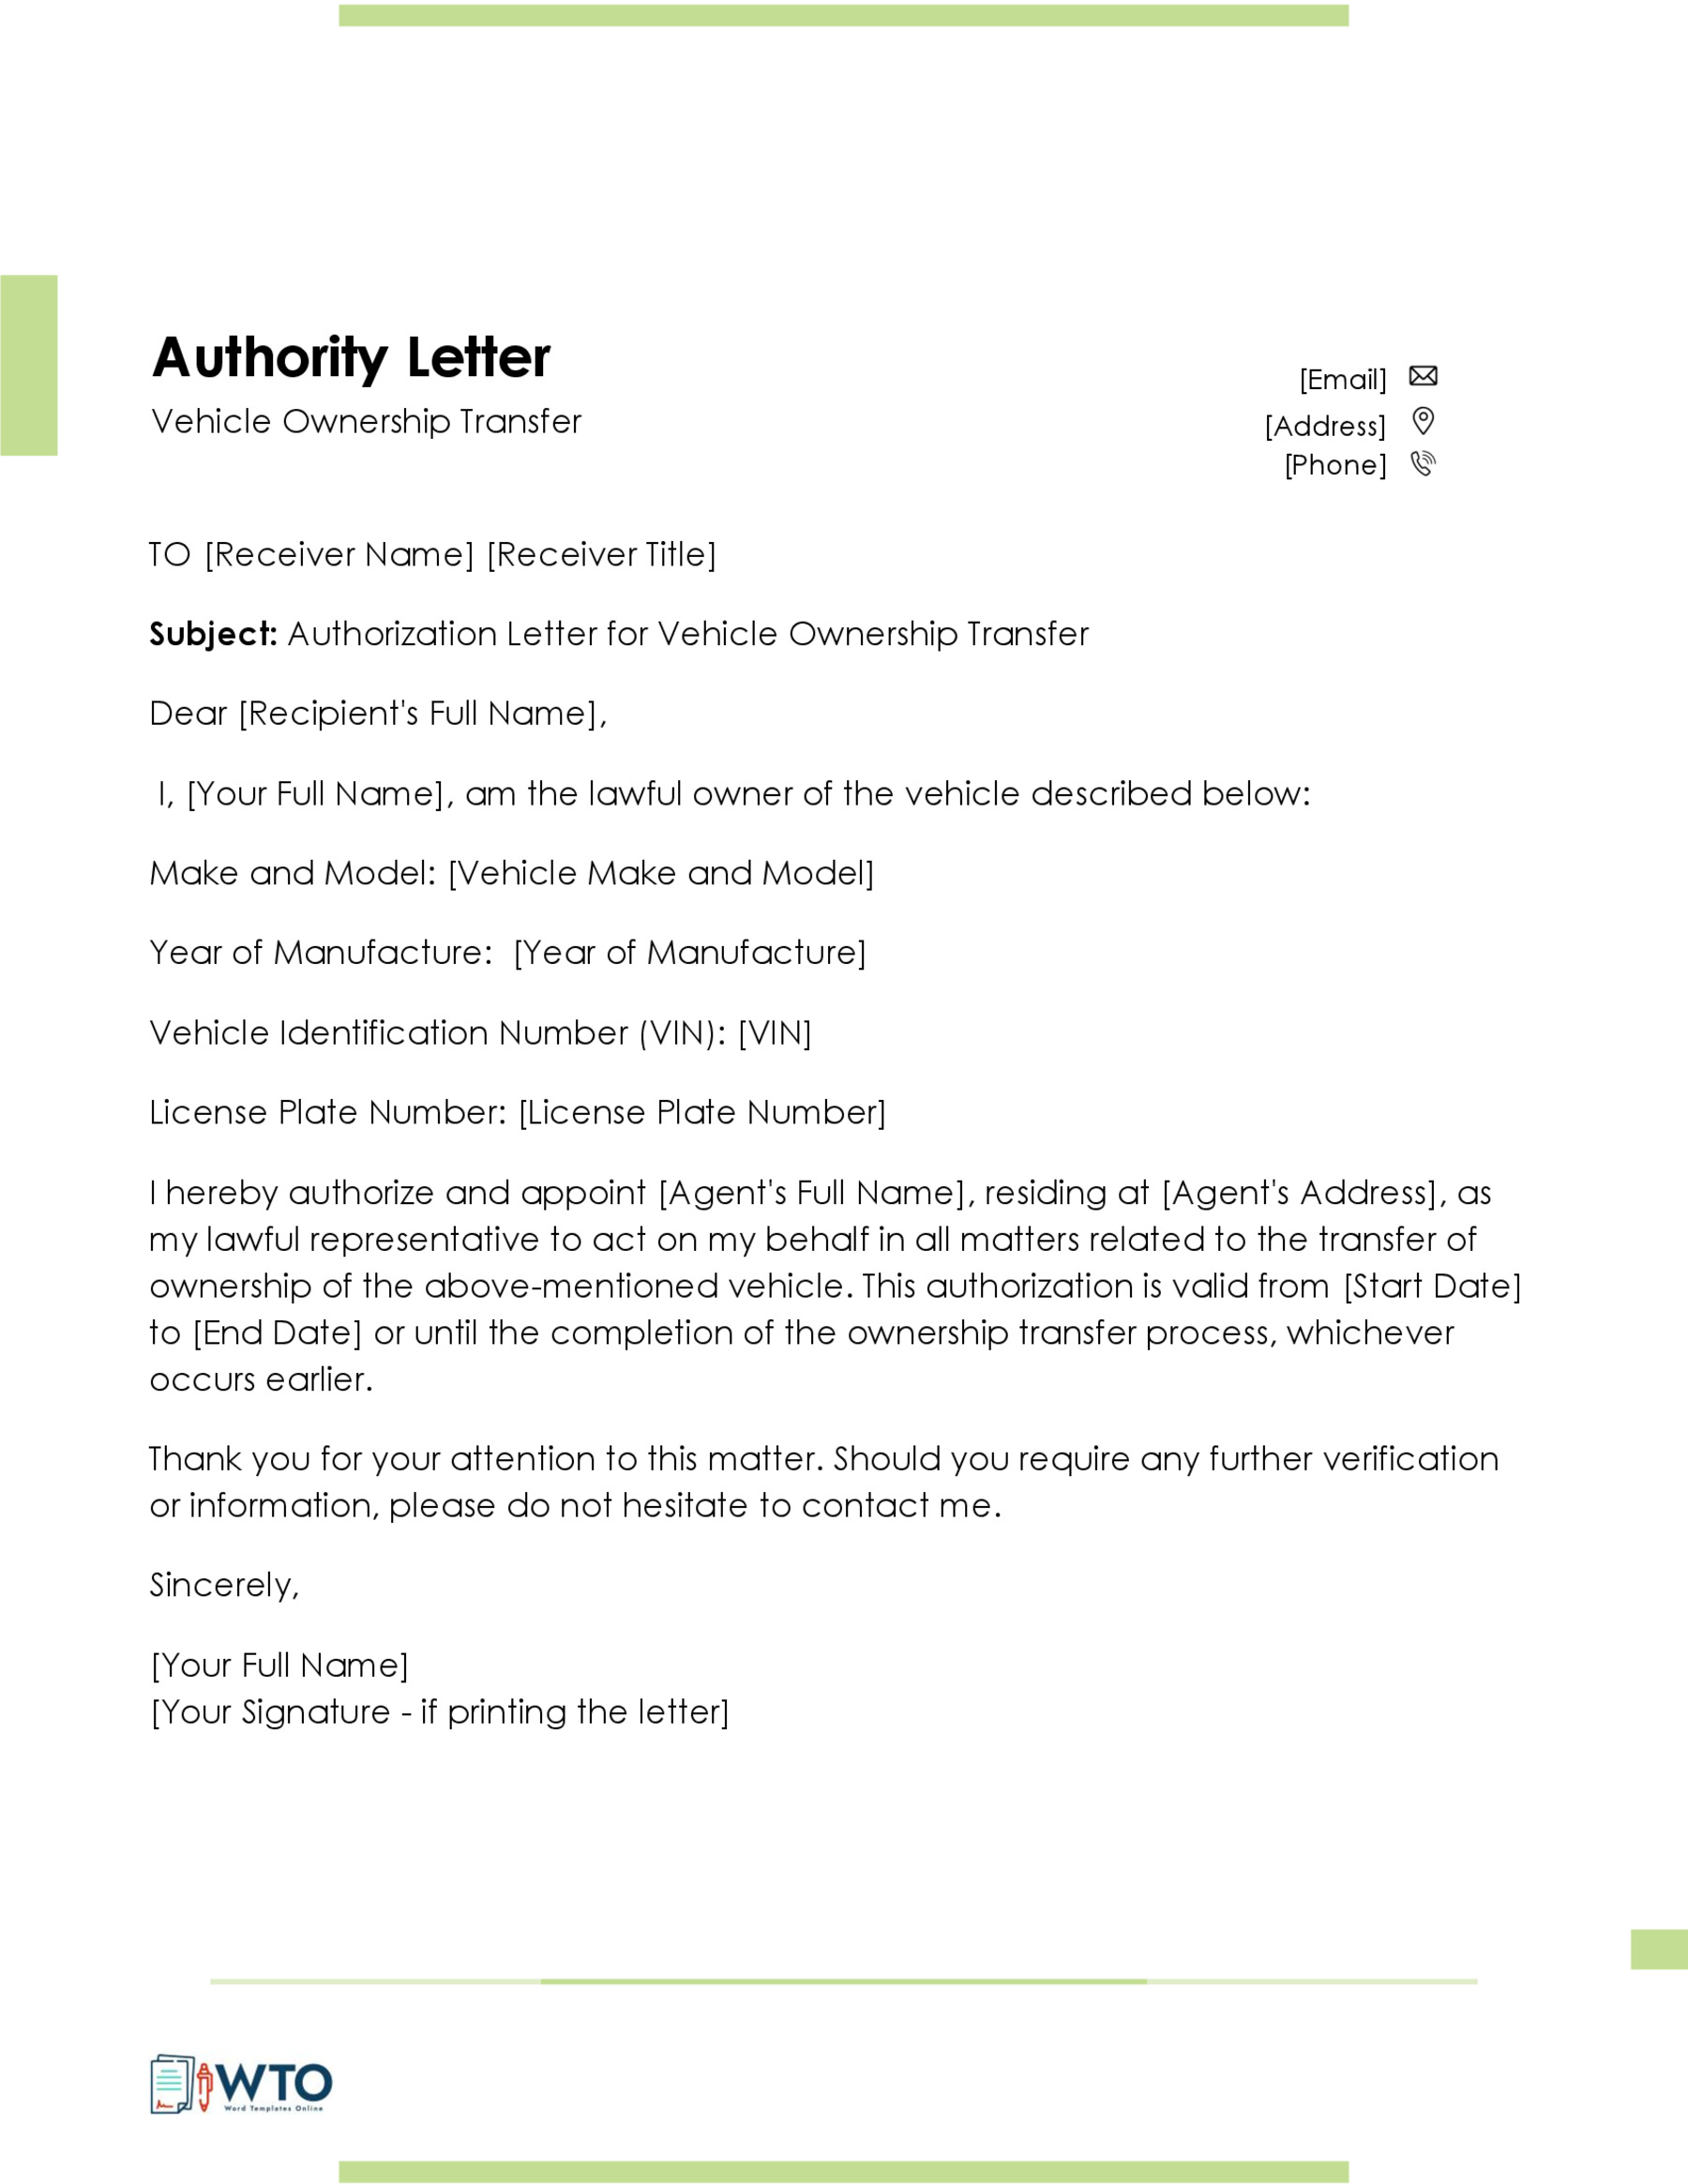 Letter to Transfer Ownership of a Vehicle Template in ms word free download